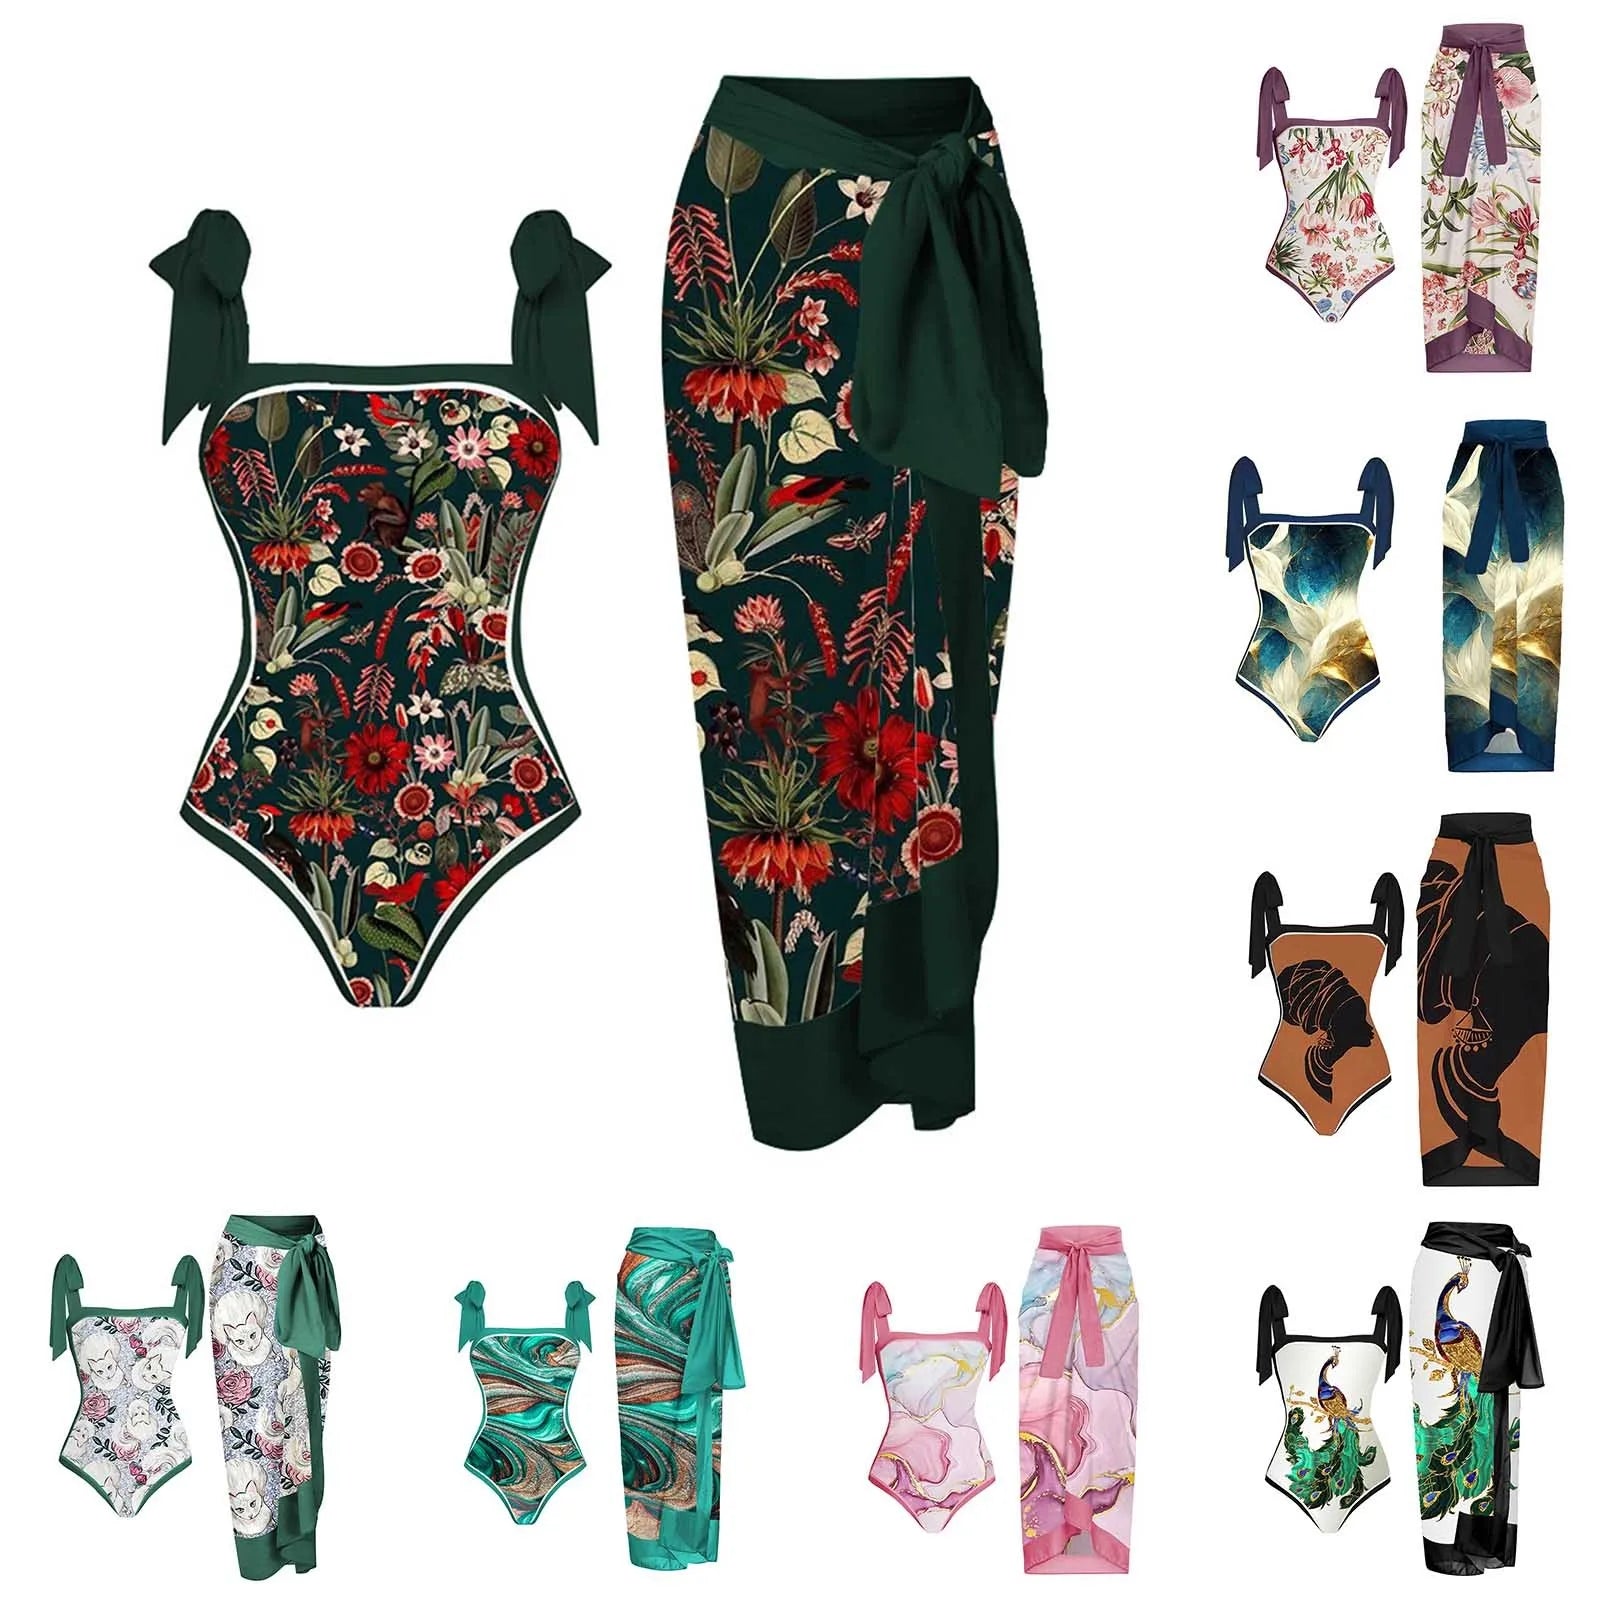 Women Vintage Colorblock Abstract Floral Print 1 Piece Swimwear+1 Piece Cover UP Two Micro Bikinis Summer Outing